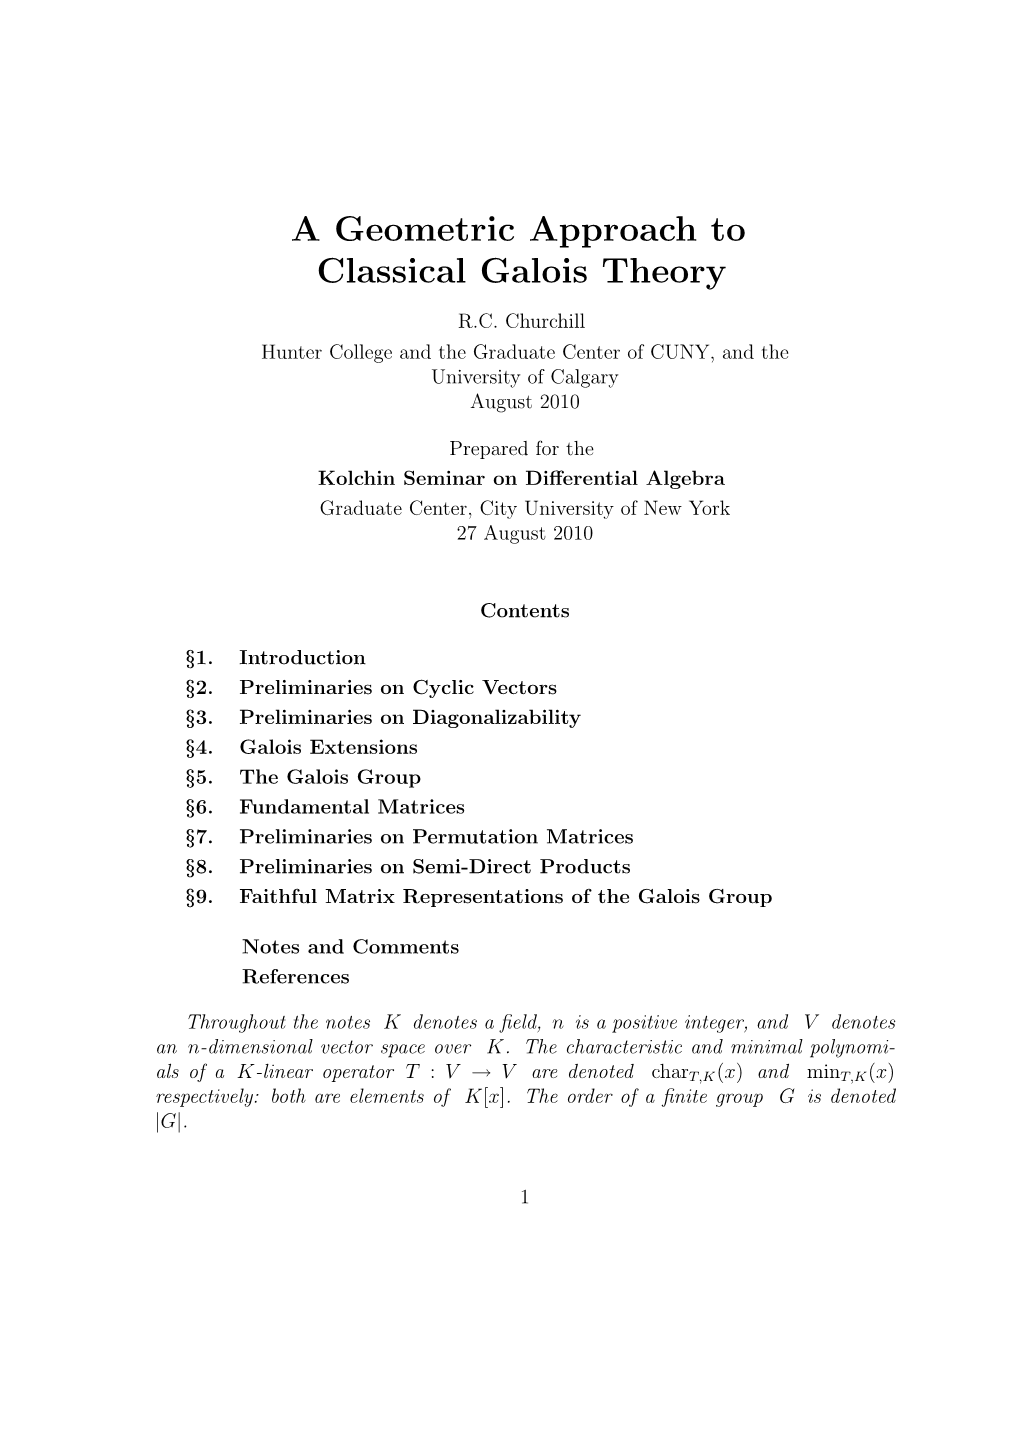 A Geometric Approach to Classical Galois Theory